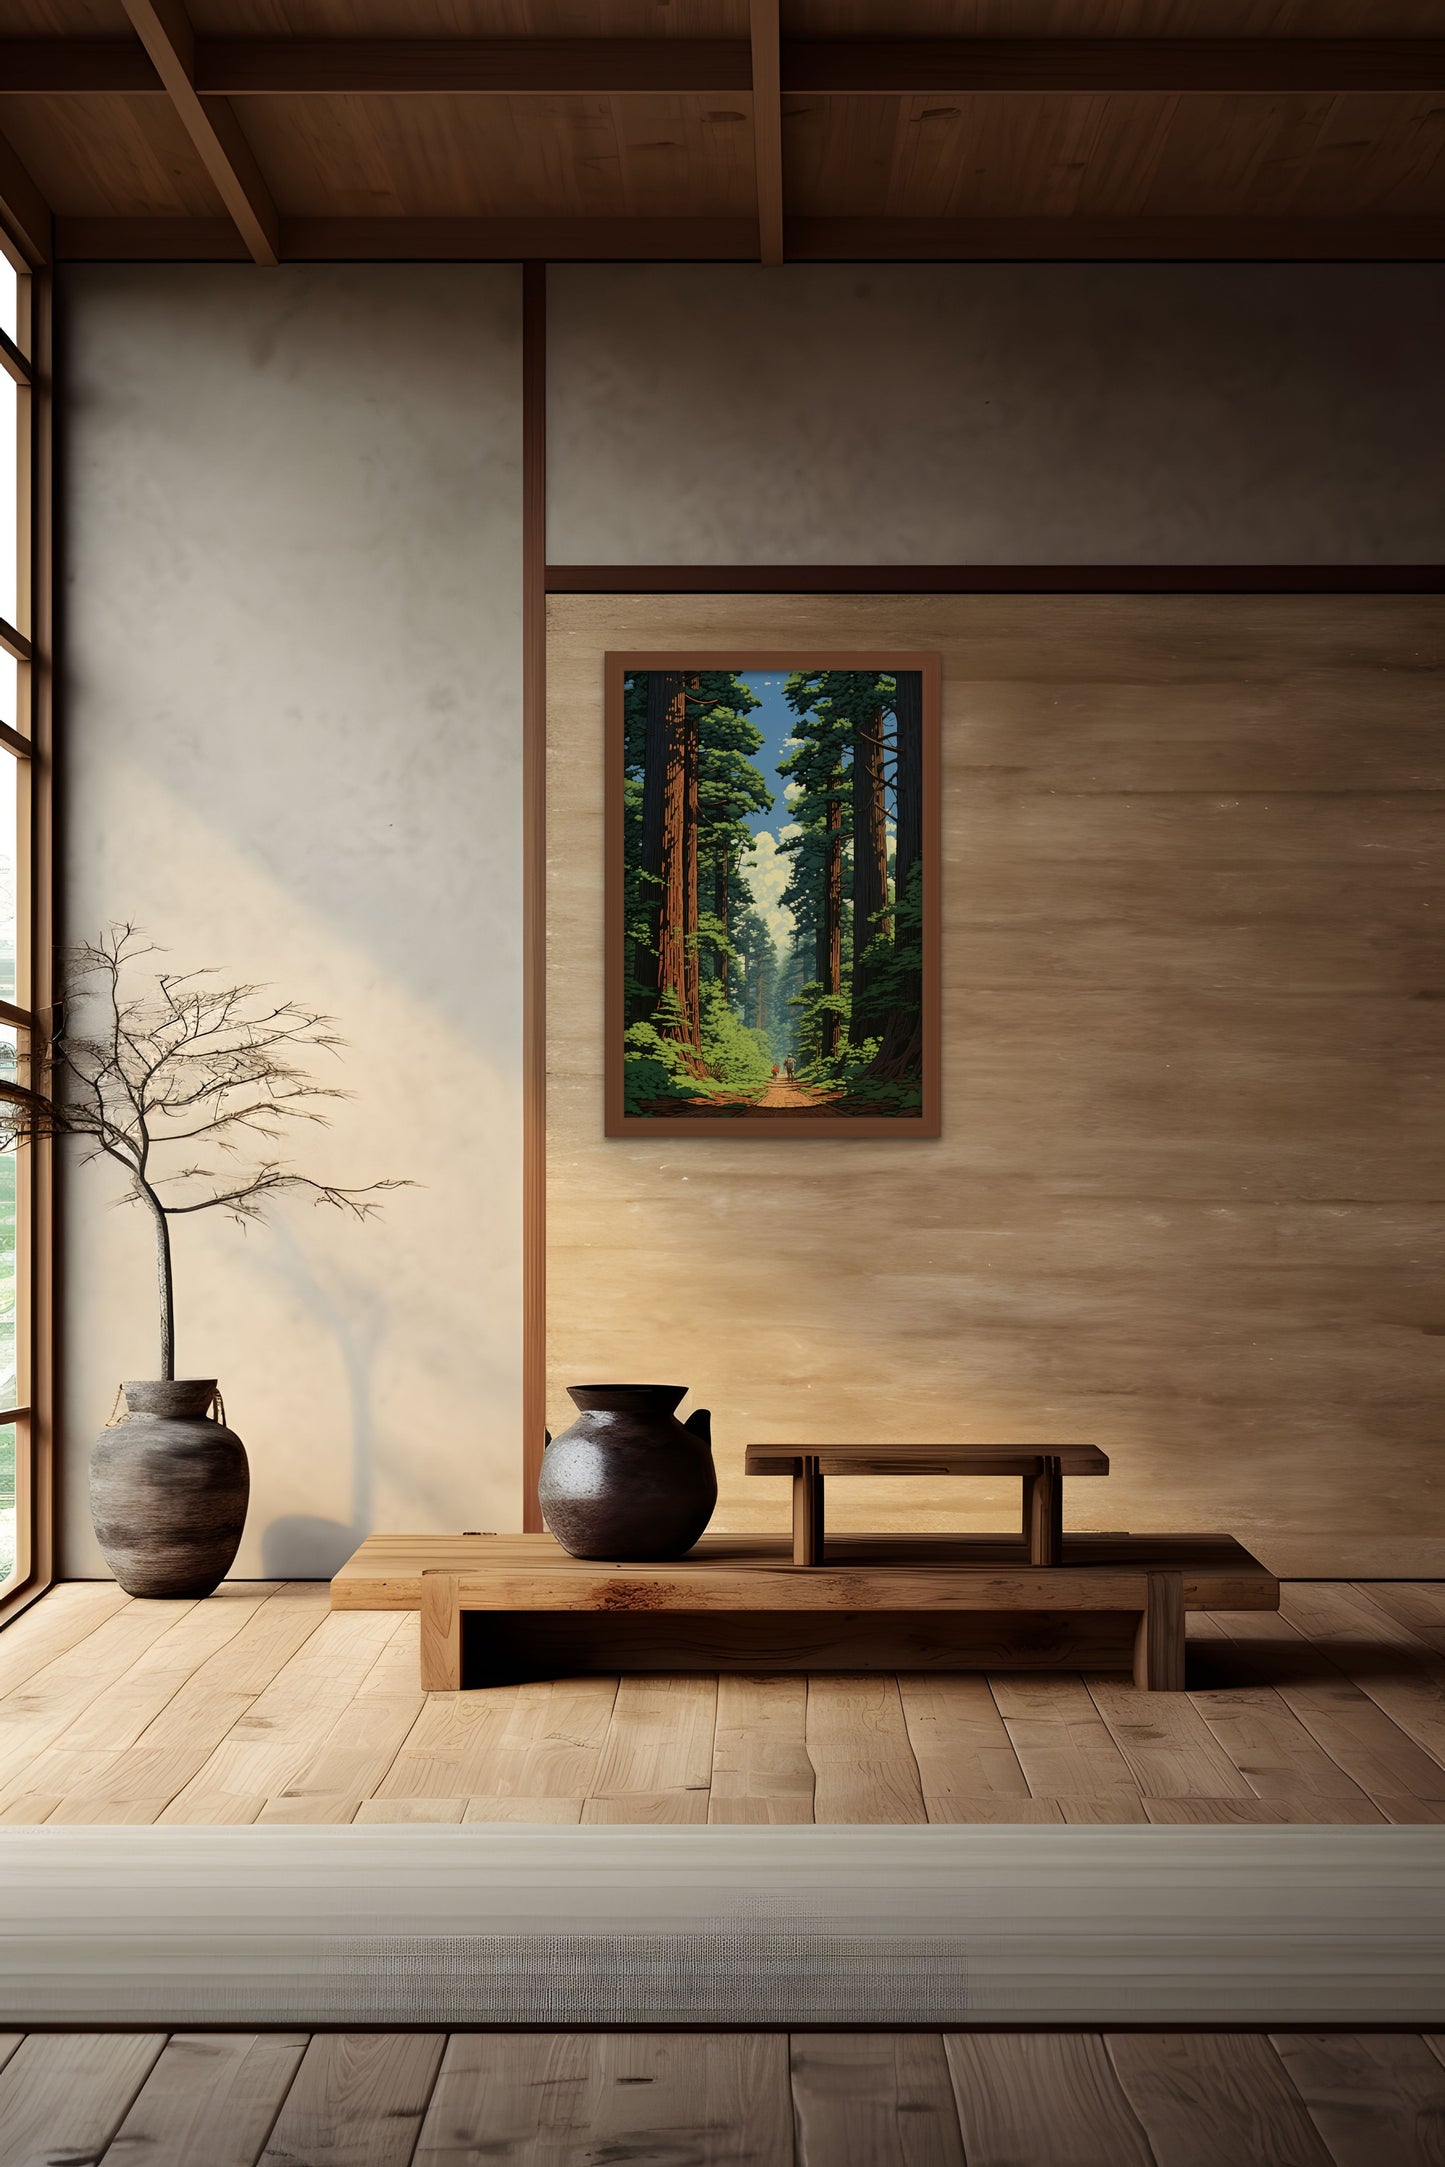 A serene Zen interior with wooden bench, pots, and a forest painting on the wall.